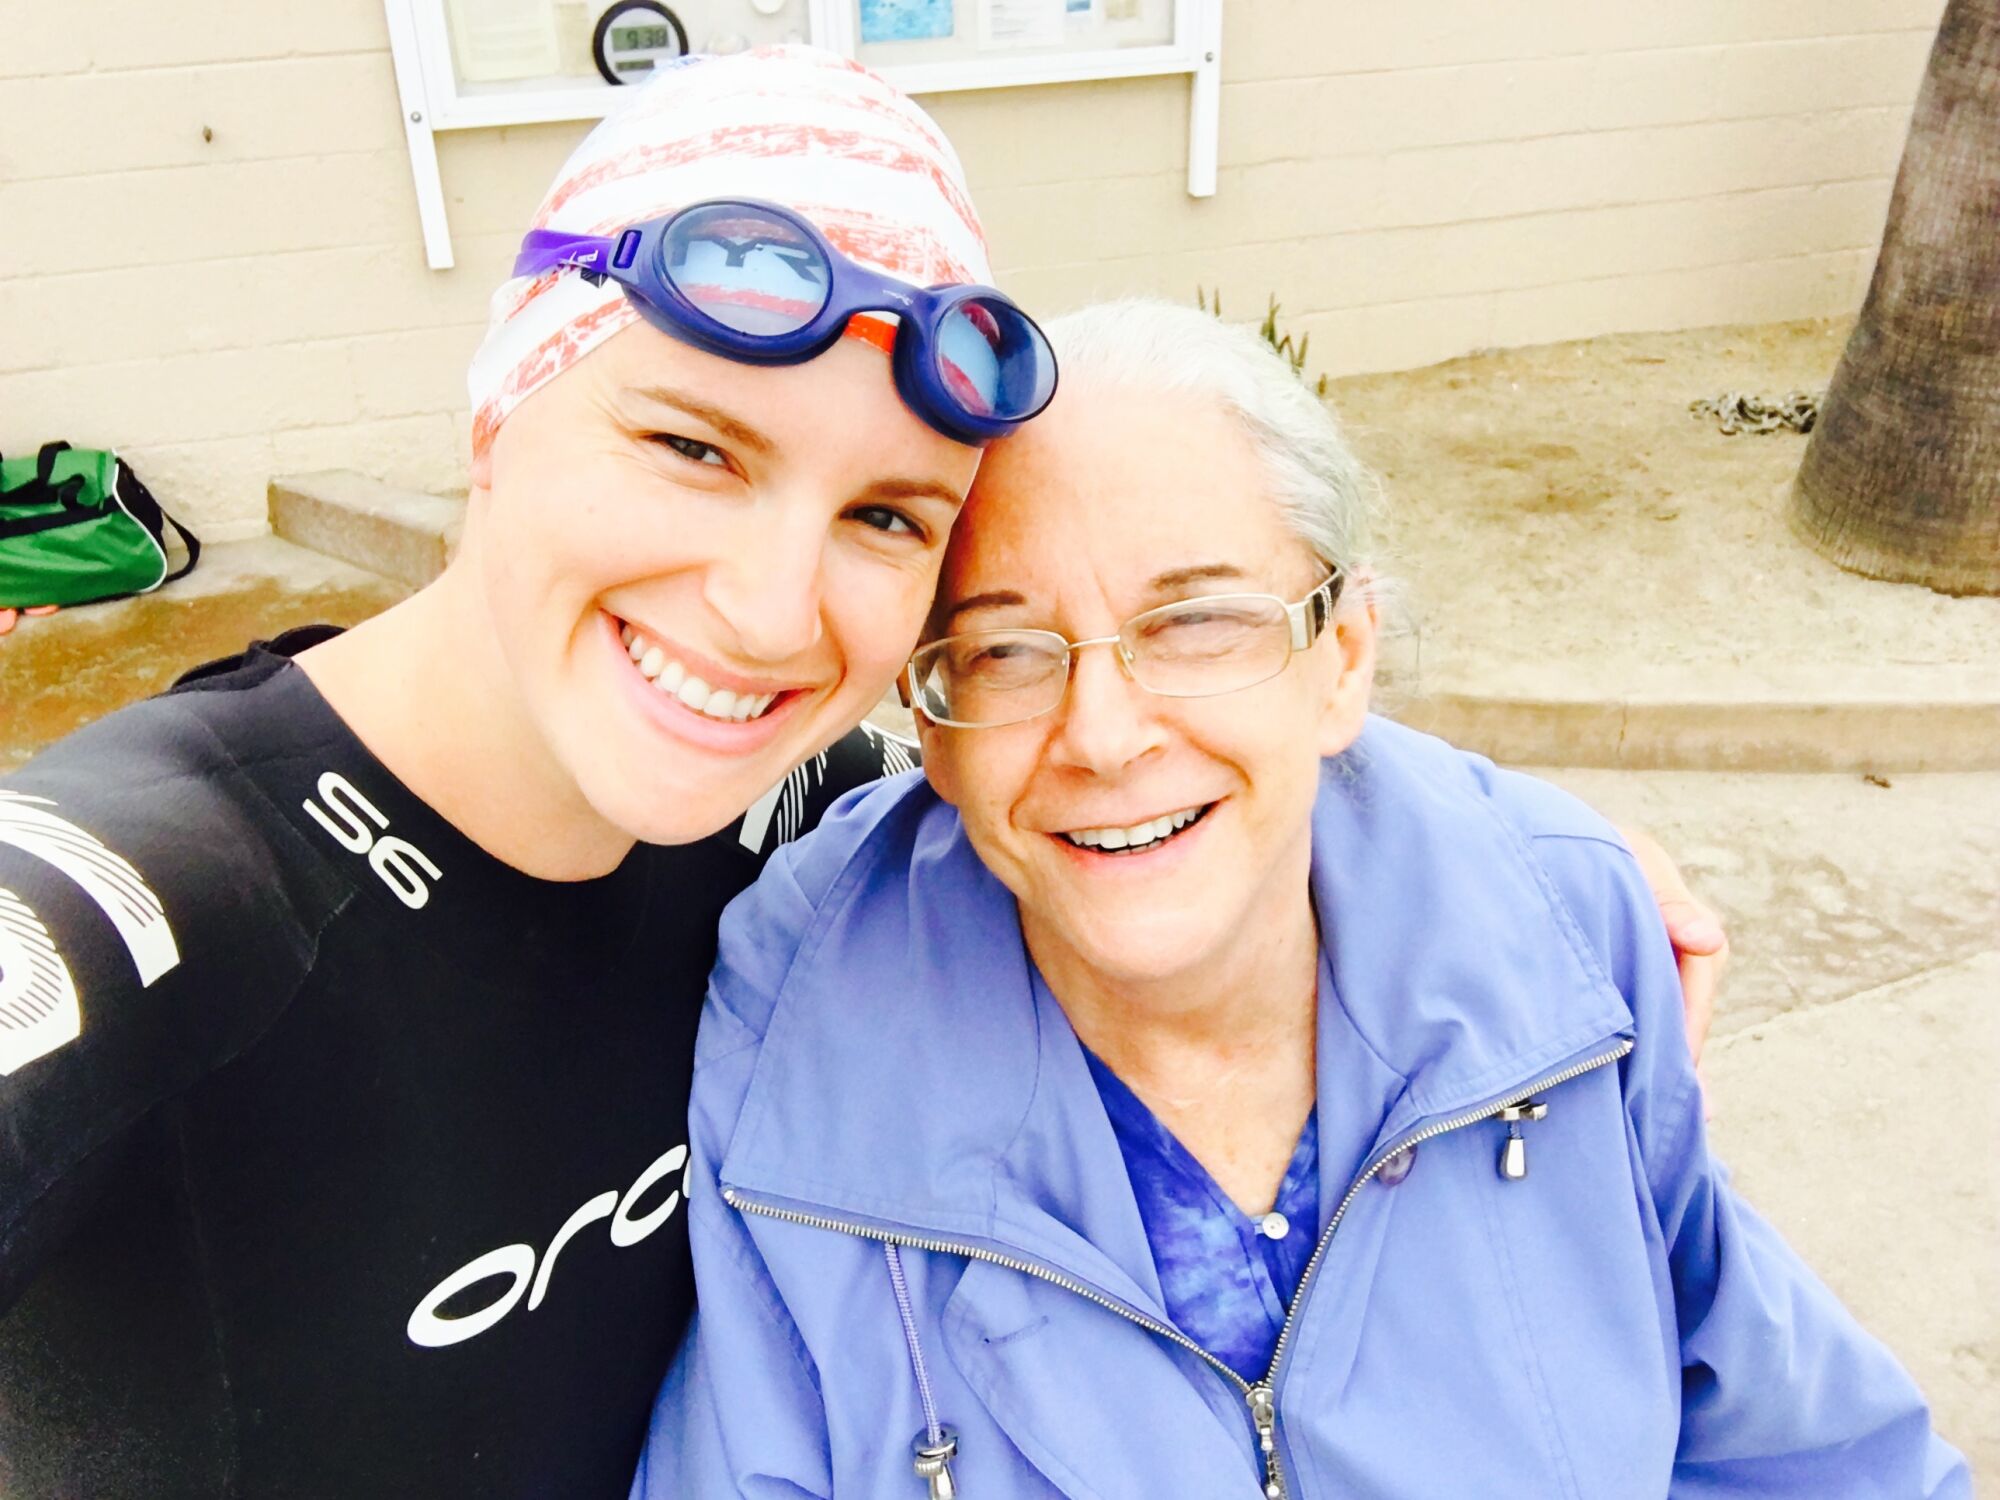 Susan Bos takes a selfie after racing in a triathlon next to her mom, Florence "Flossie" Bos.